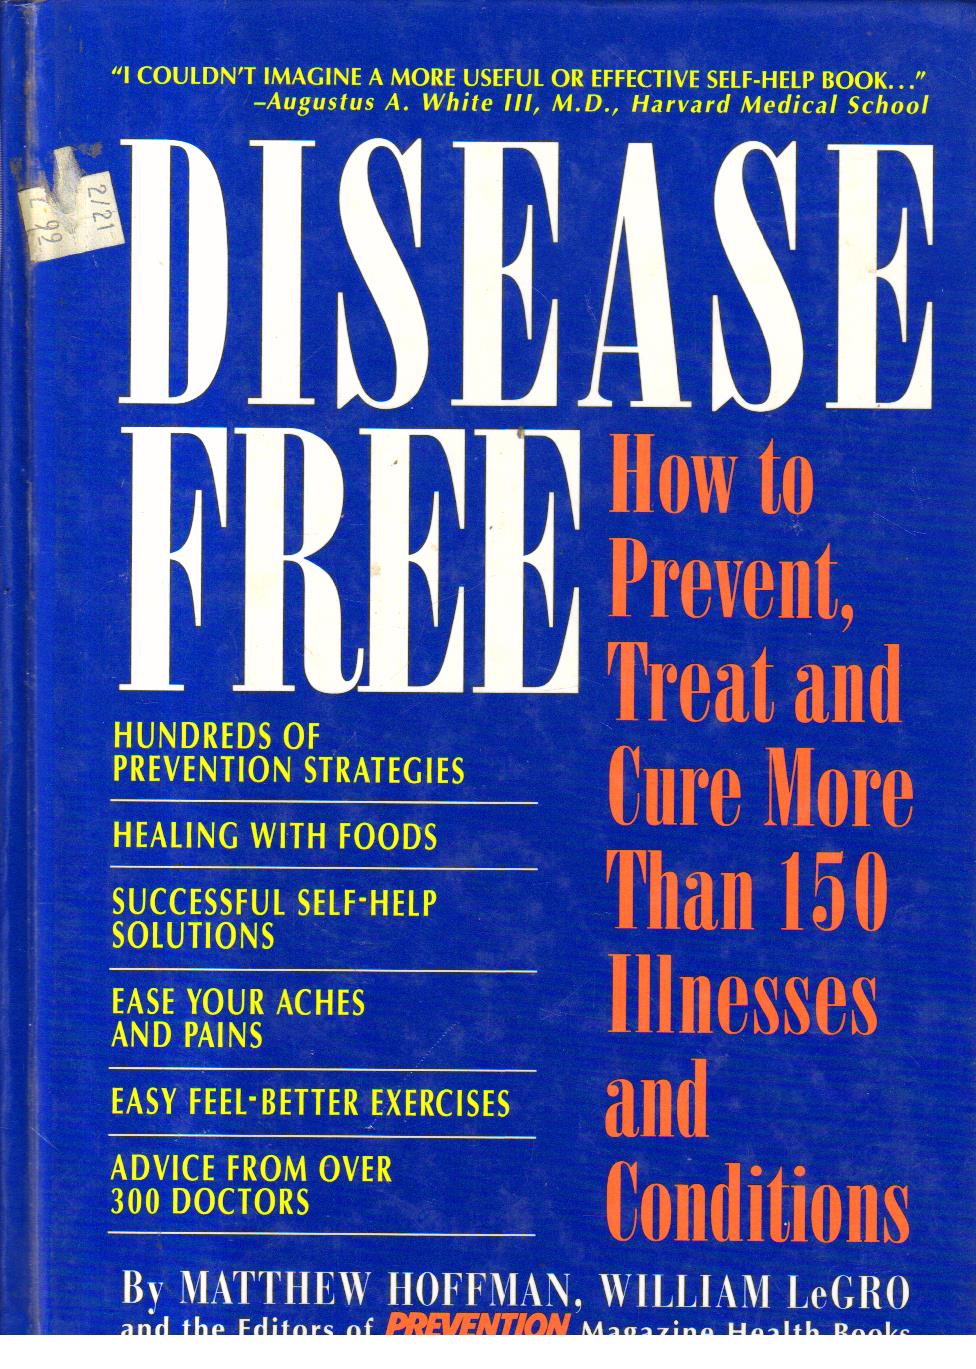 Disease Free How to Prevent Treat and Cure More than 150 Illnesses and Conditions.